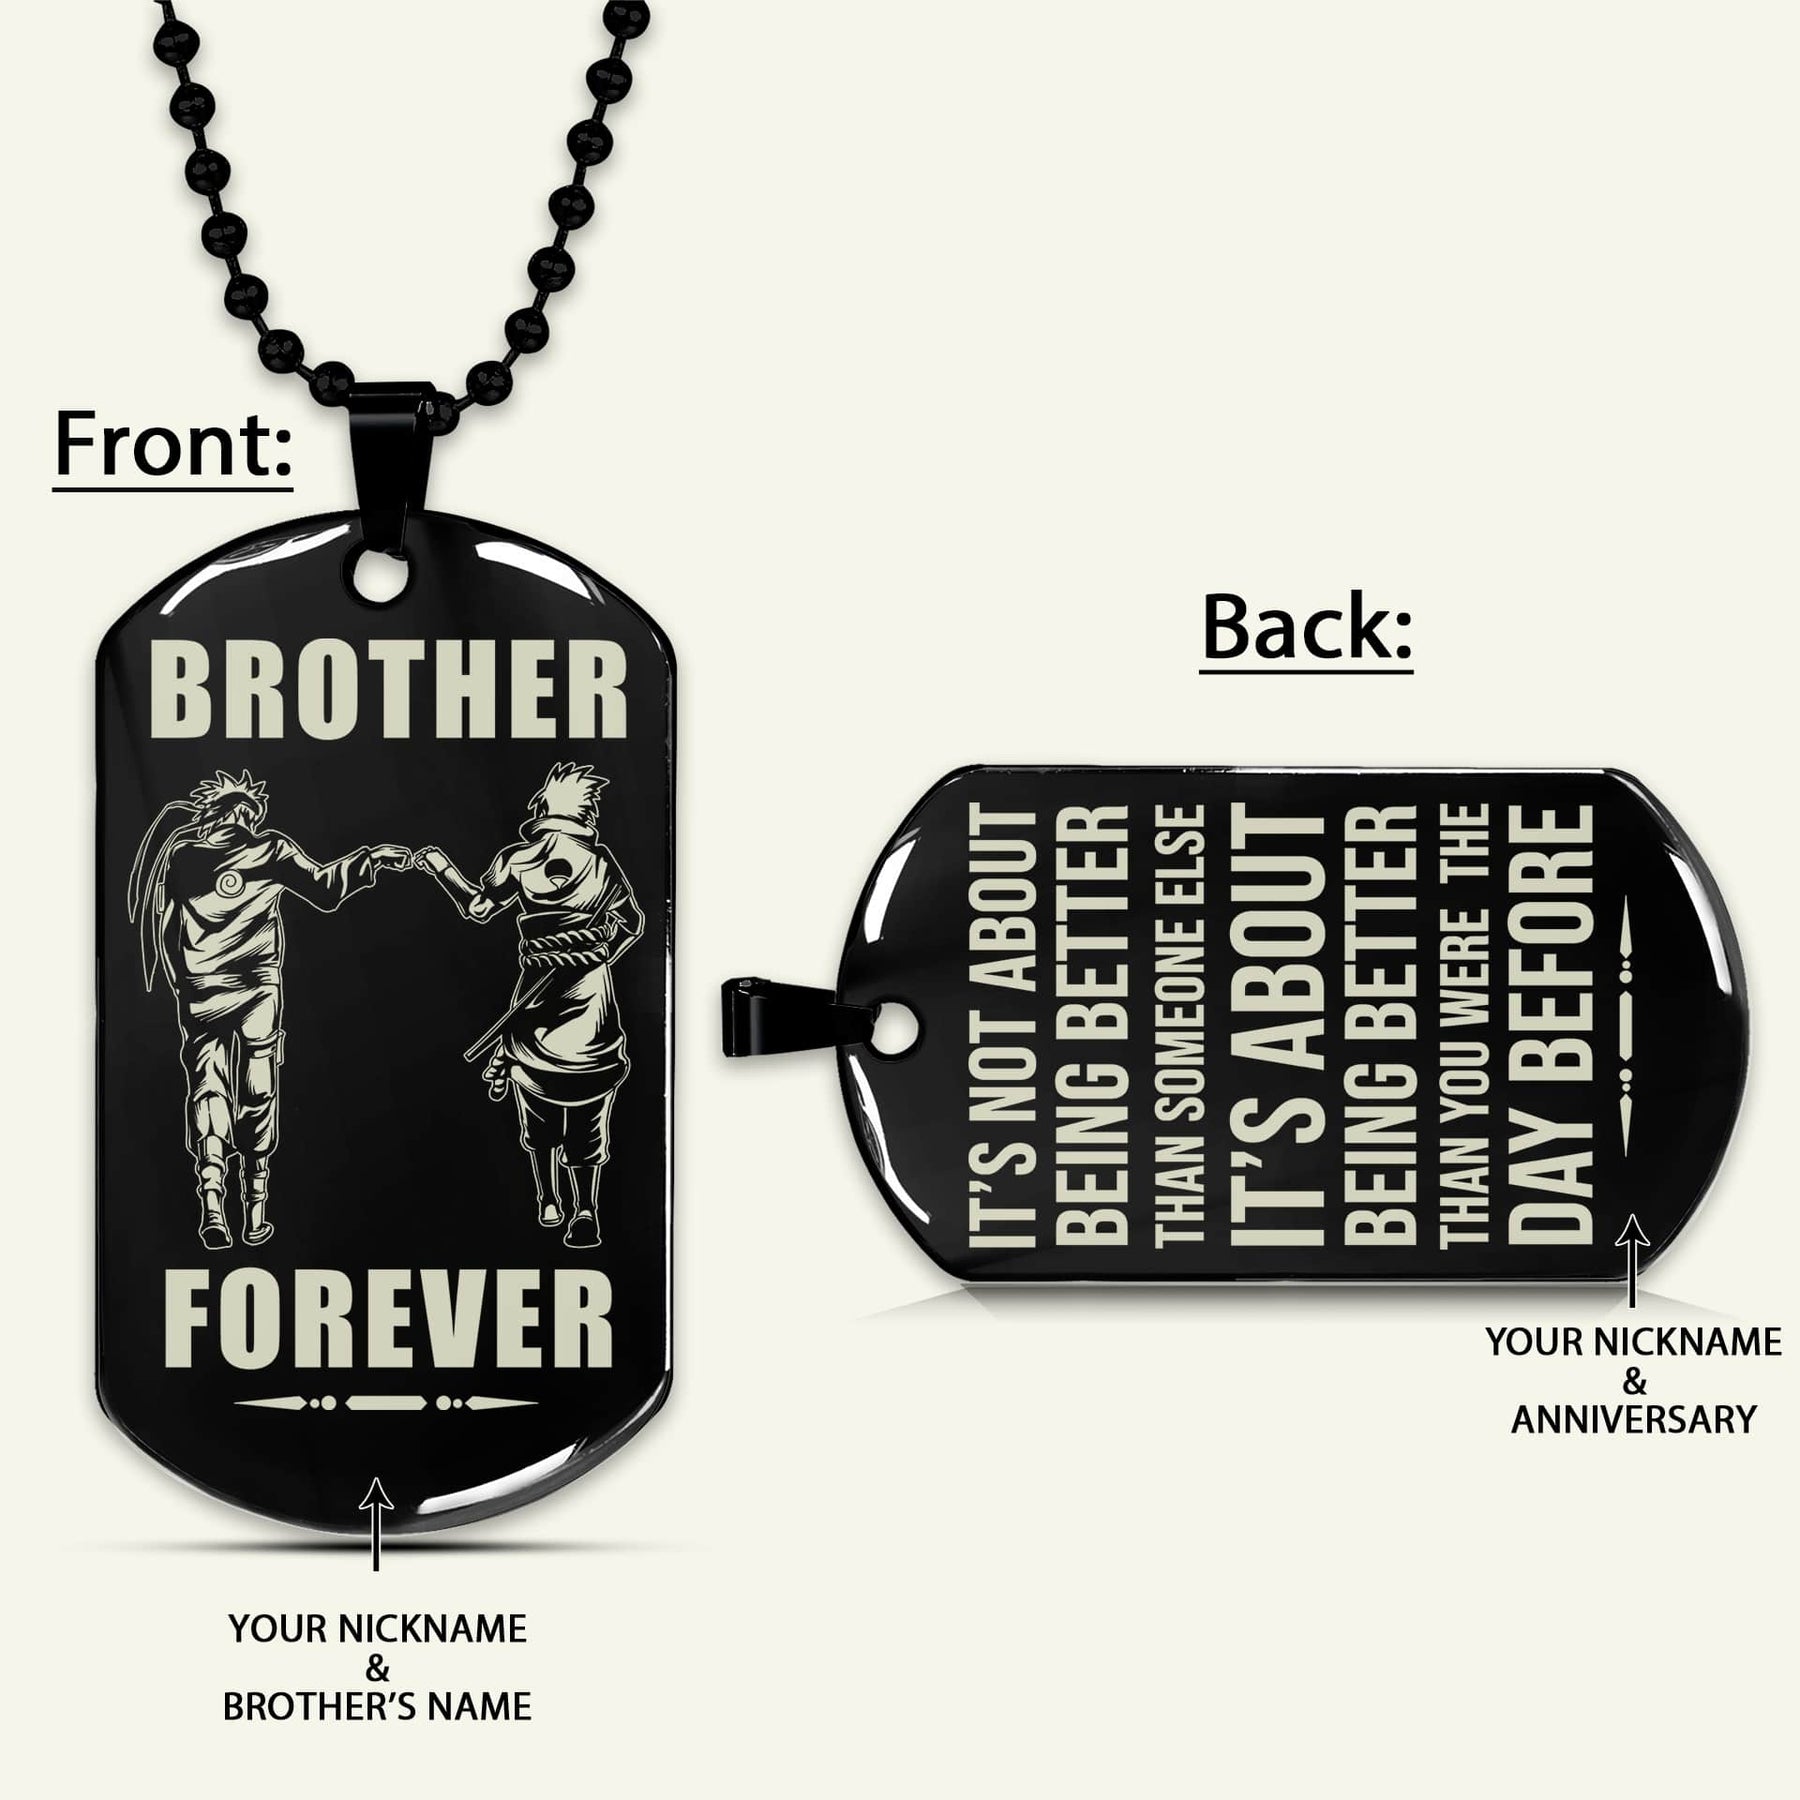 NAD029 - Brother Forever - It's About Being Better Than You Were The Day Before - Uzumaki Naruto - Uchiha Sasuke - Naruto Dog Tag - Engrave Double Side Black Dog Tag